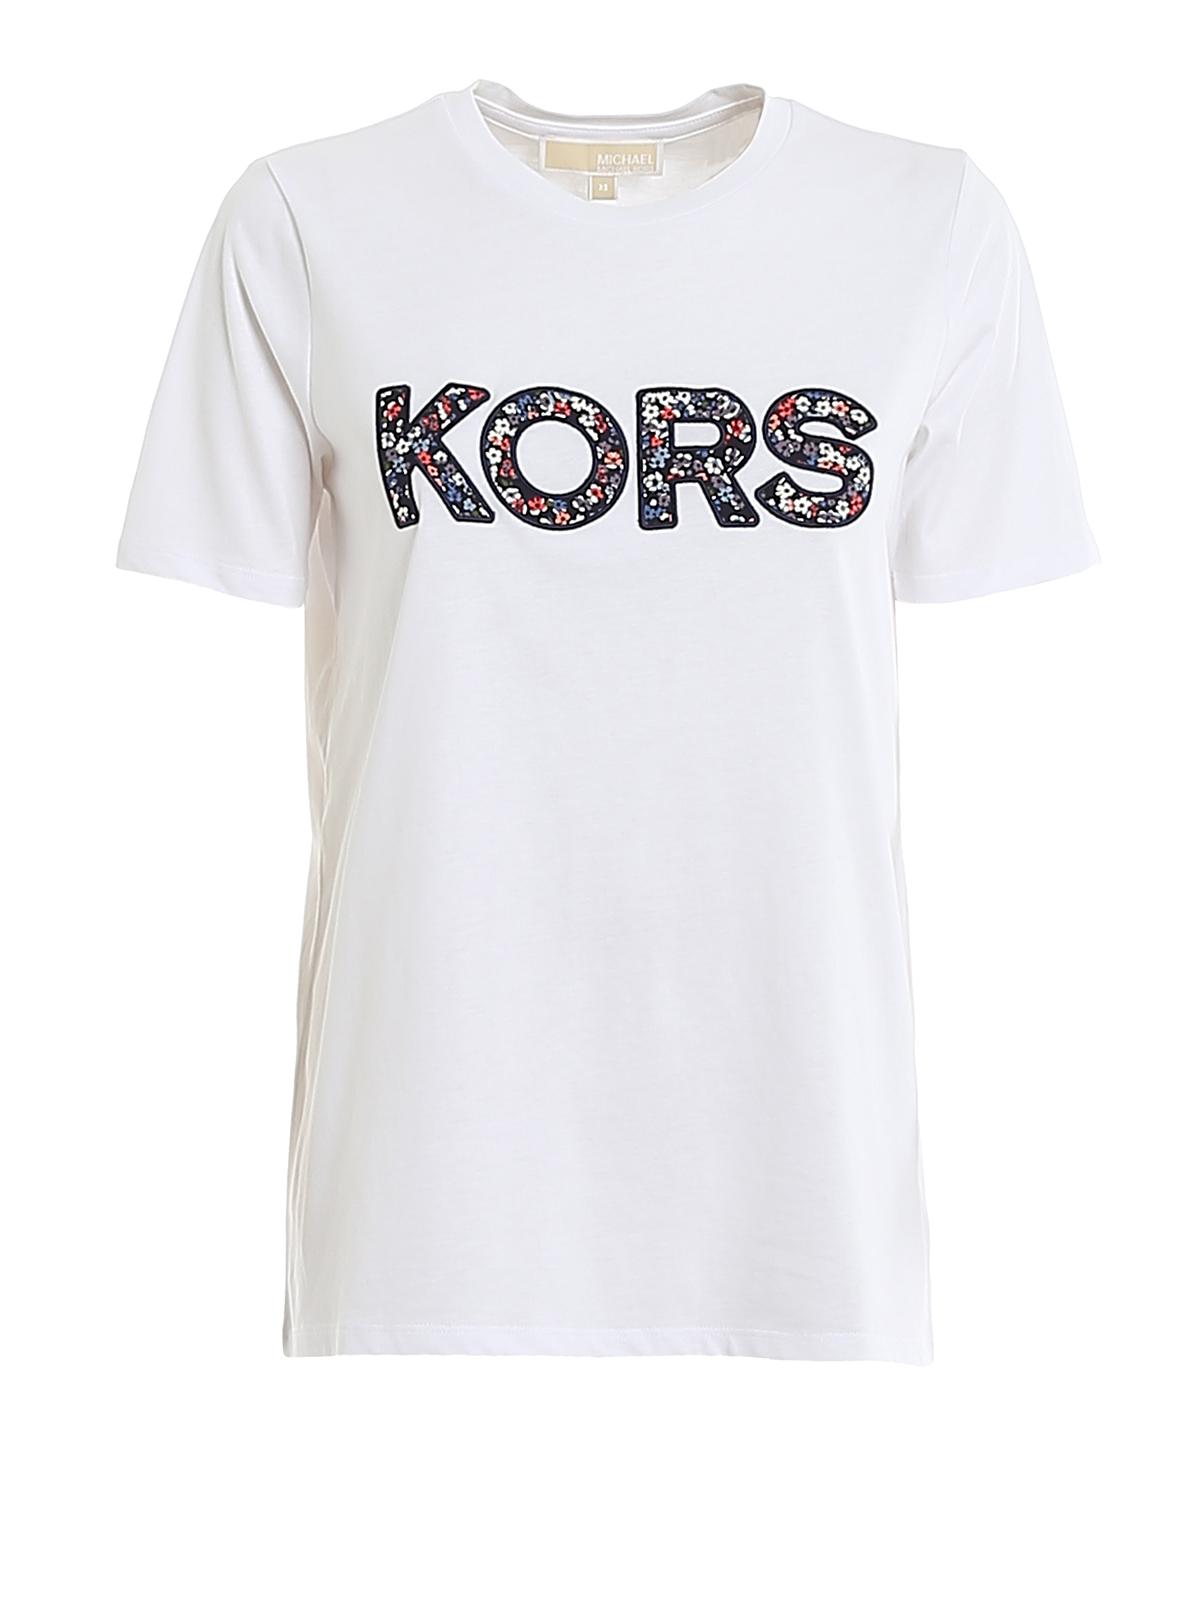 Michael Kors Floral Patch Logo Cotton T-shirt in White - Lyst